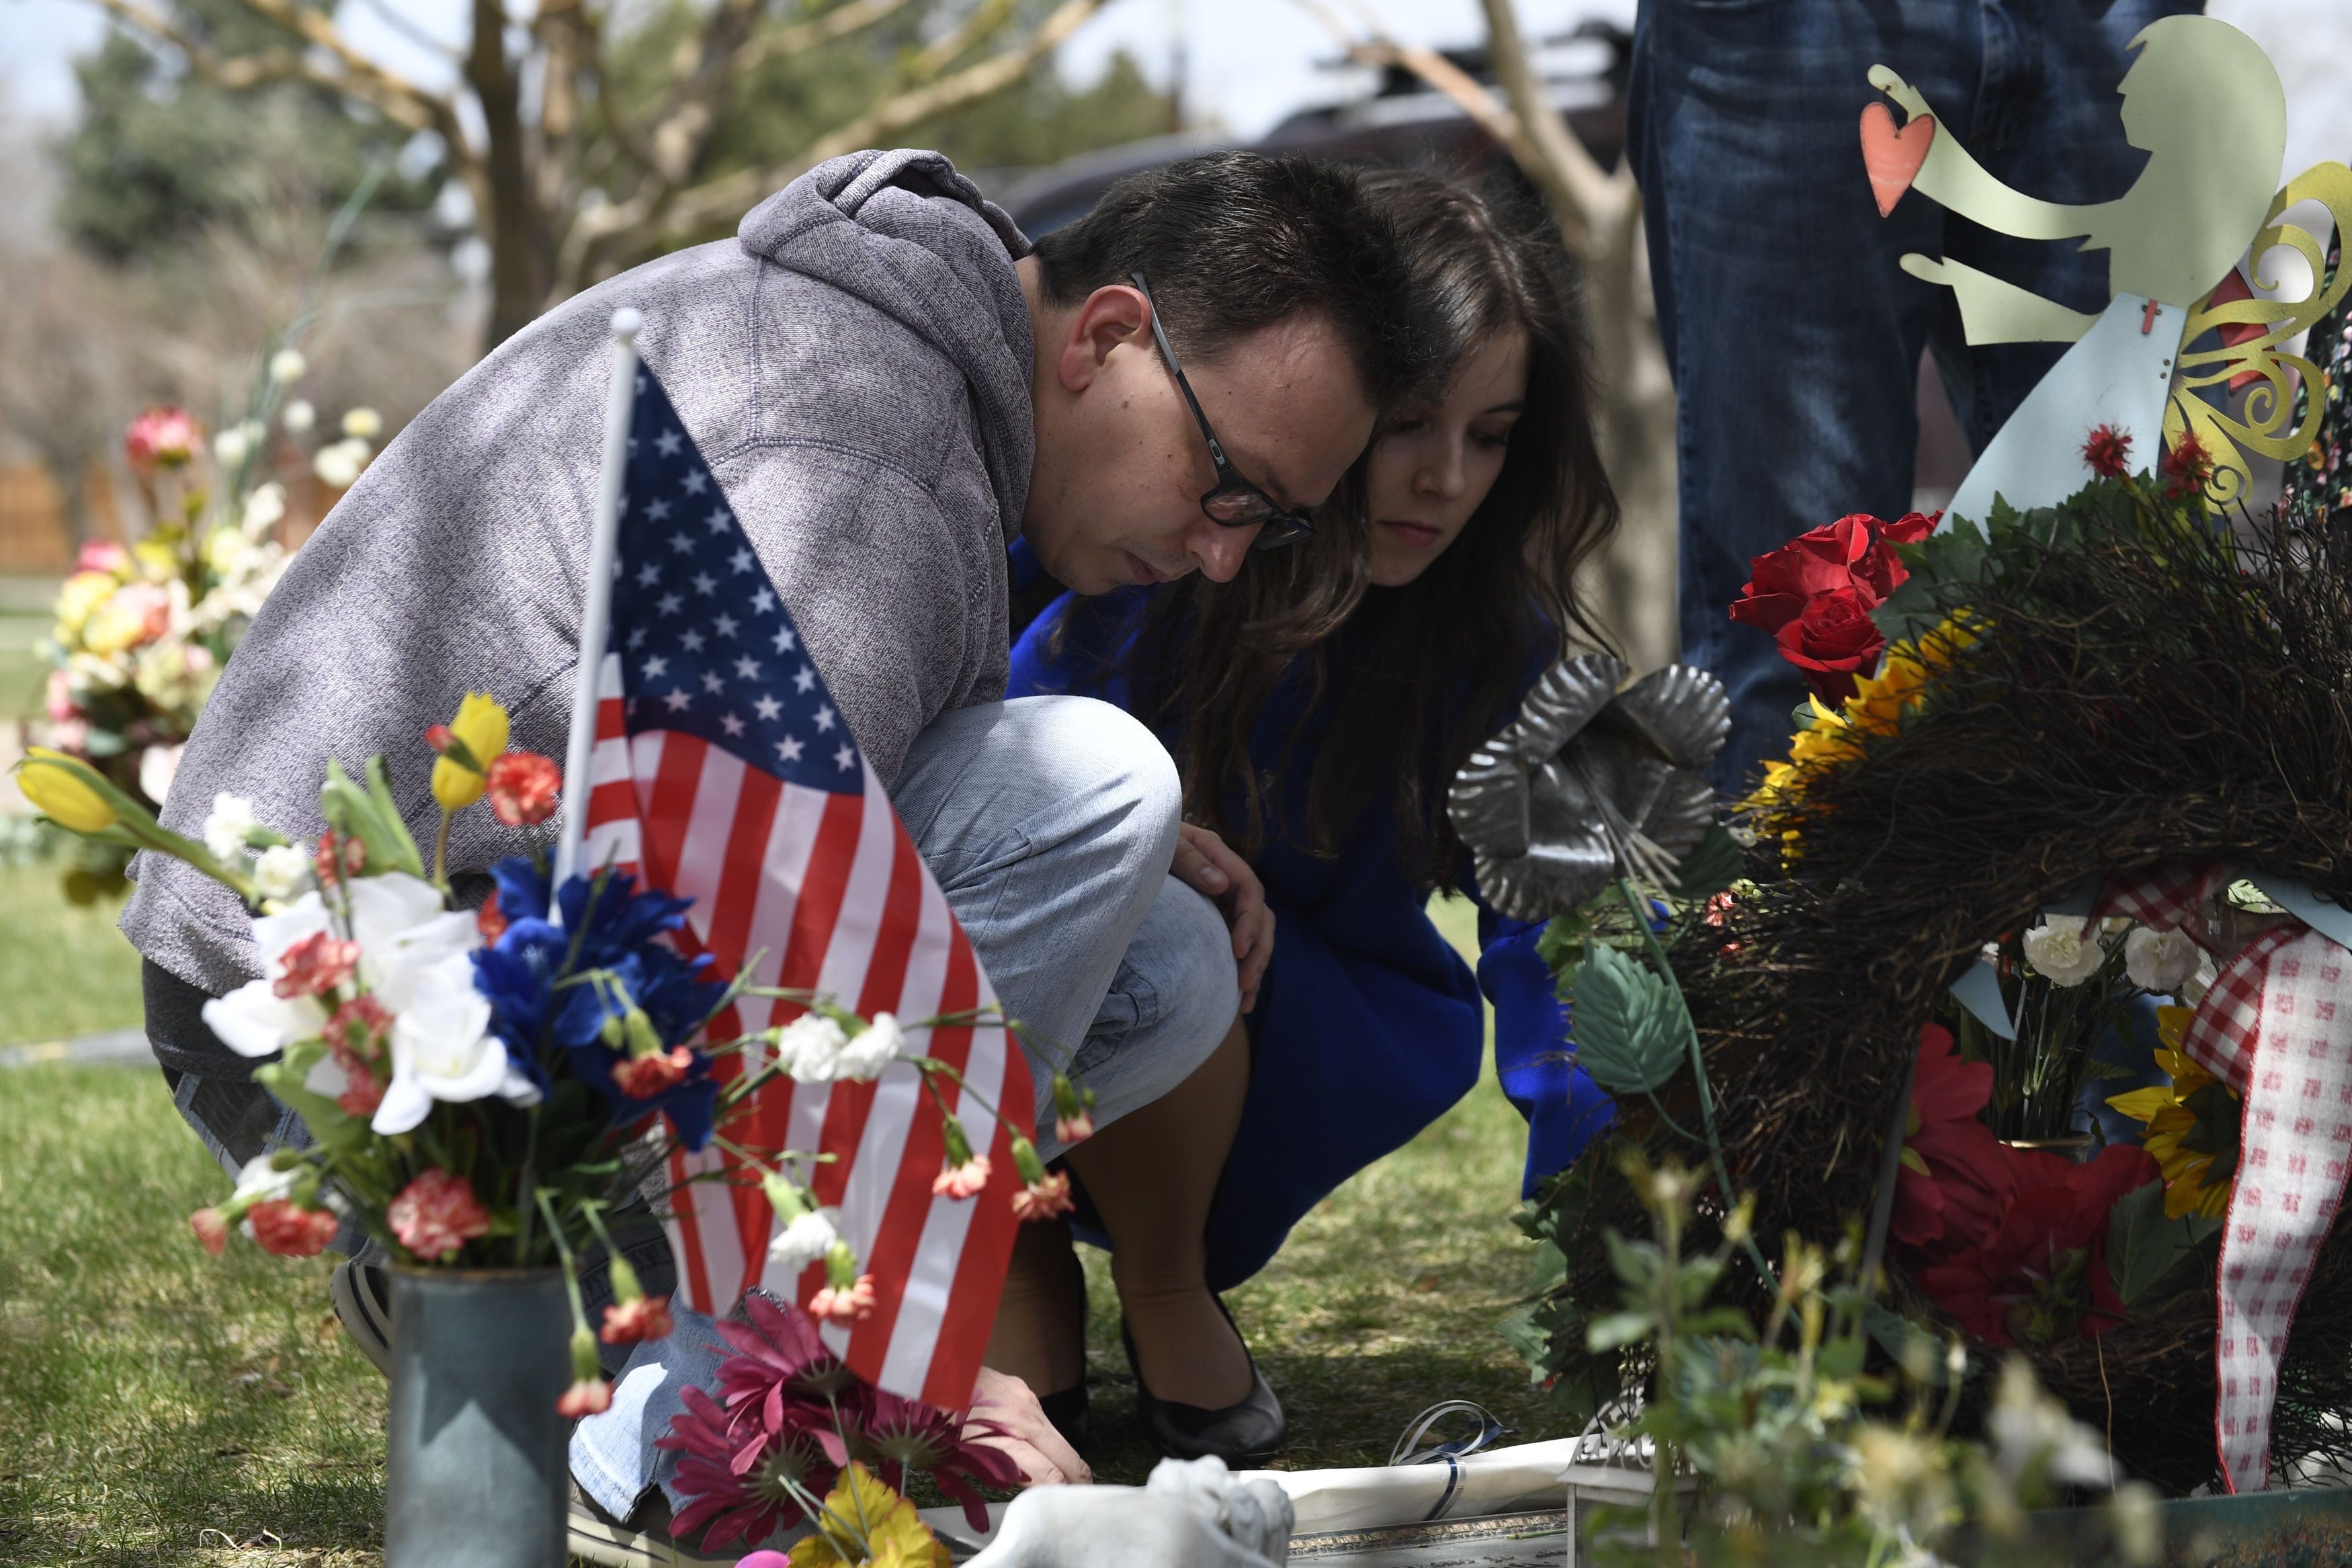  Michael Scott (R) and Marie Sophie (L) visit the grave of his sister, Rachel Scott, at the Chapel Hill Memorial Gardens in Littleton, Colorado.